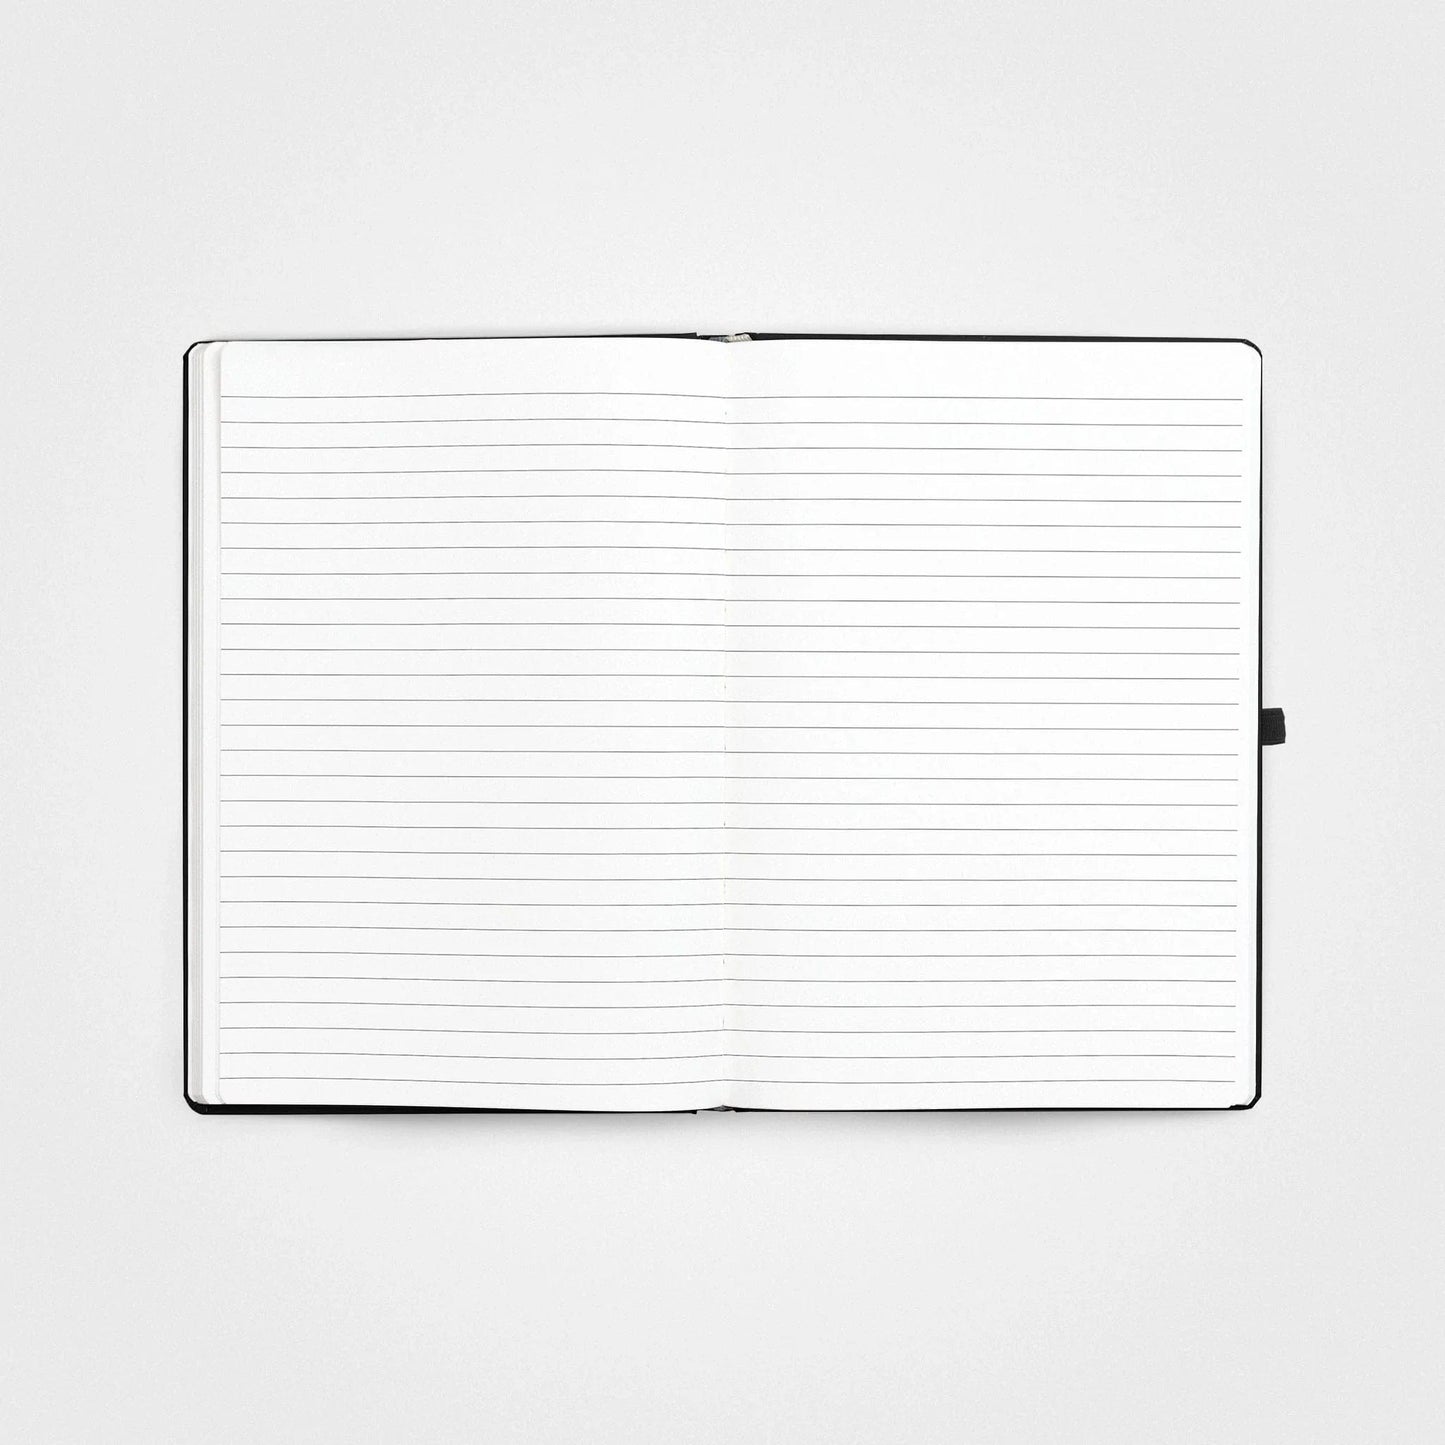 Stone paper notebook - A5 Hardcover, Charcoal black